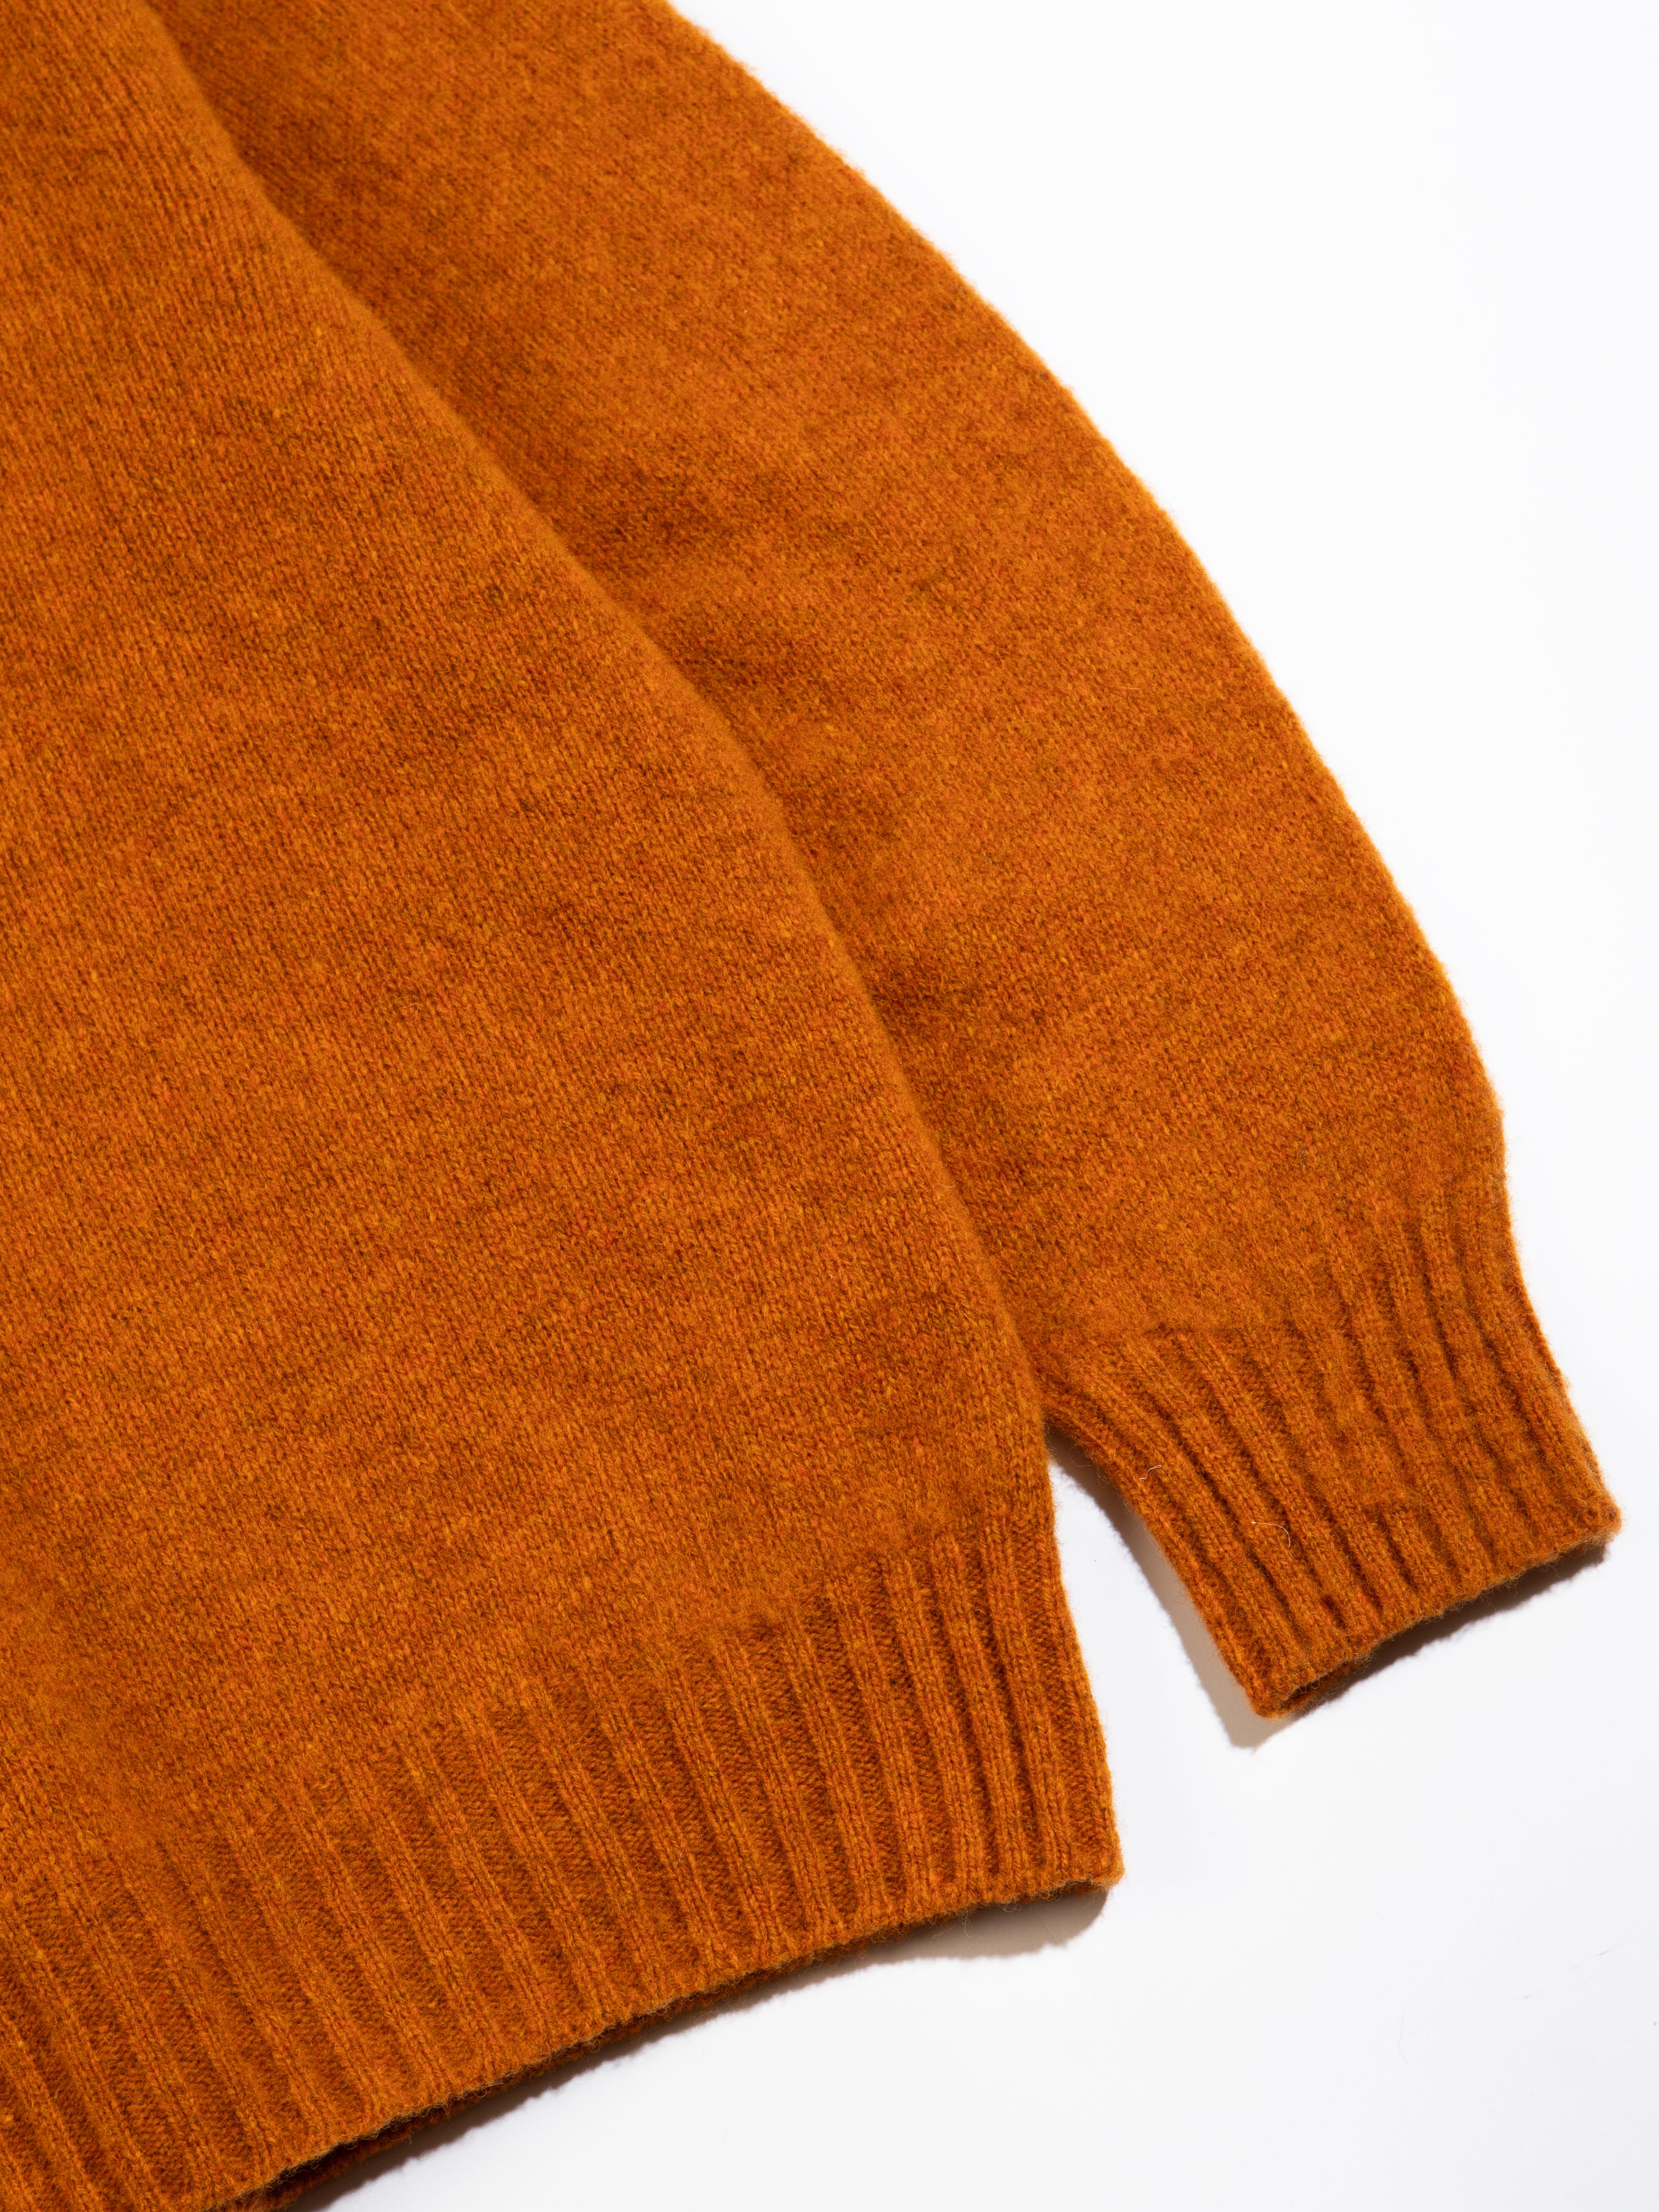 A knitted sweater from menswear brand KESTIN made from a brushed Shetland wool.